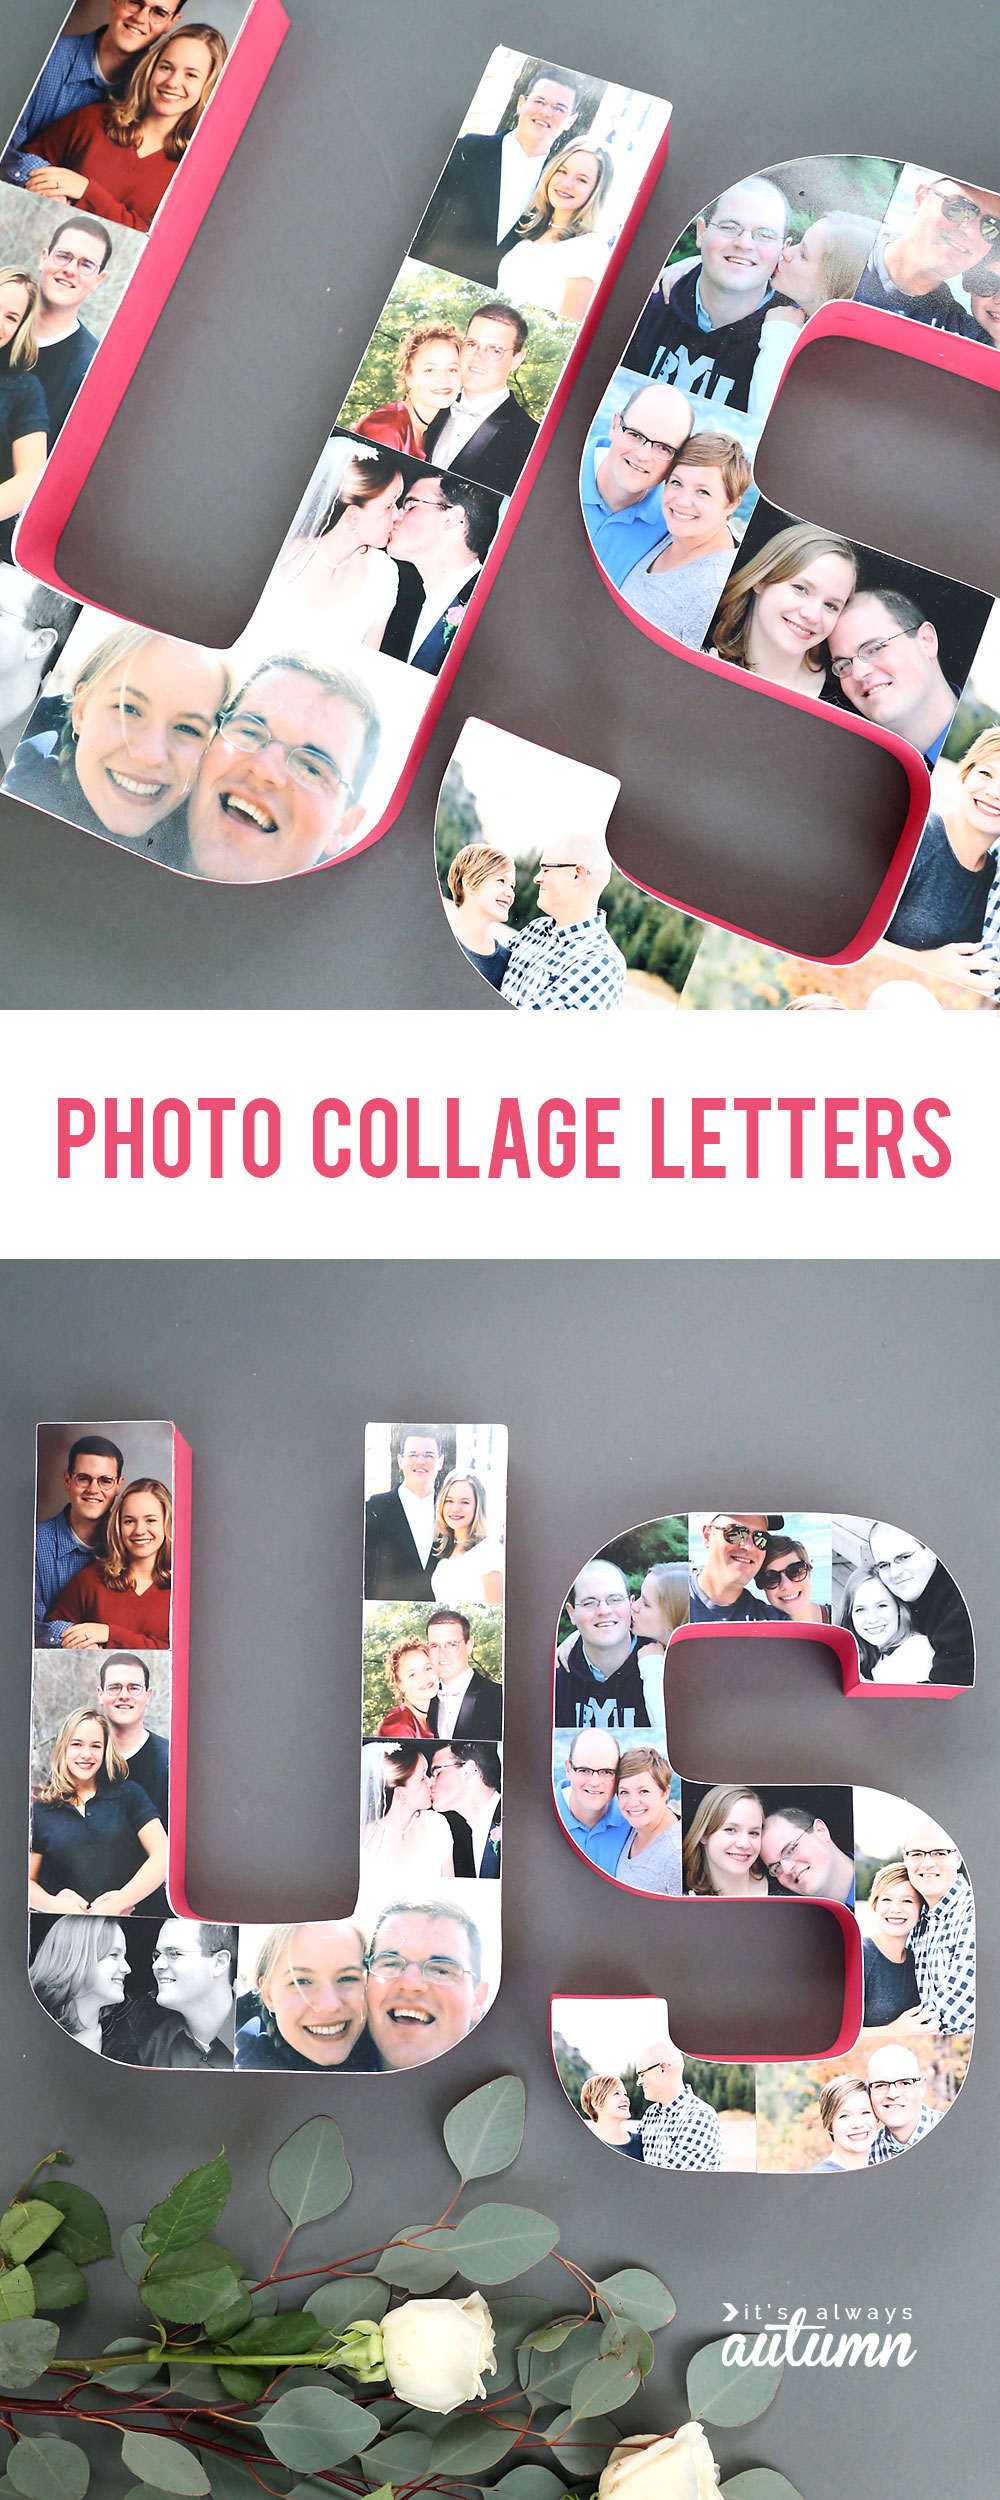 Photo collage letters